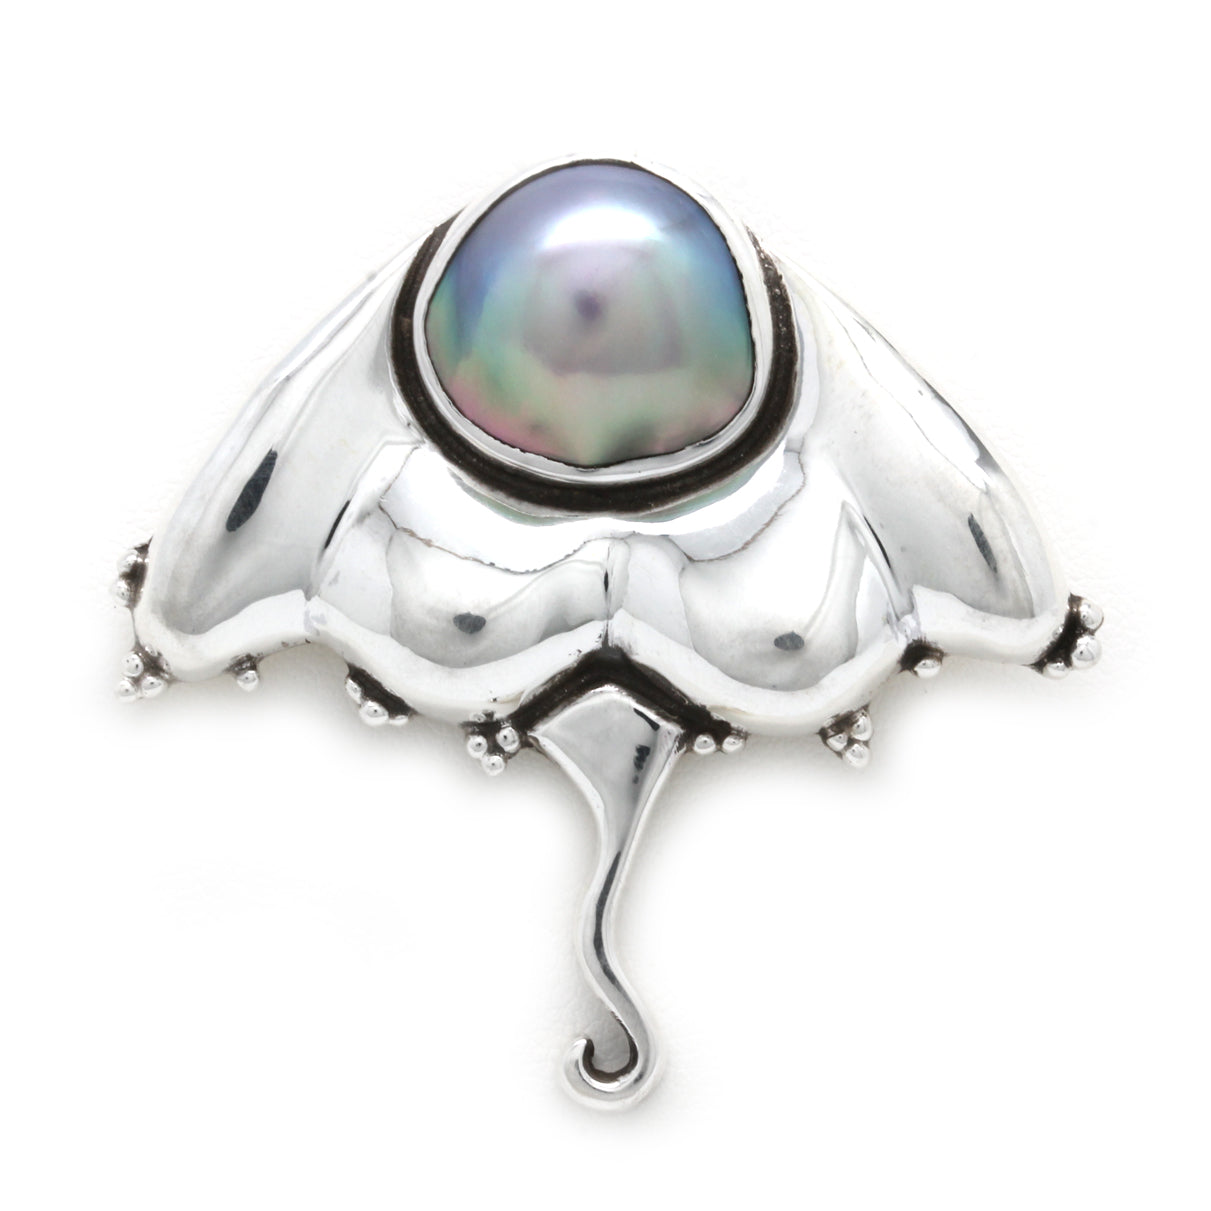 "Stingray" Silver Brooch/Pendant with Cortez Pearl by Priscila Canales